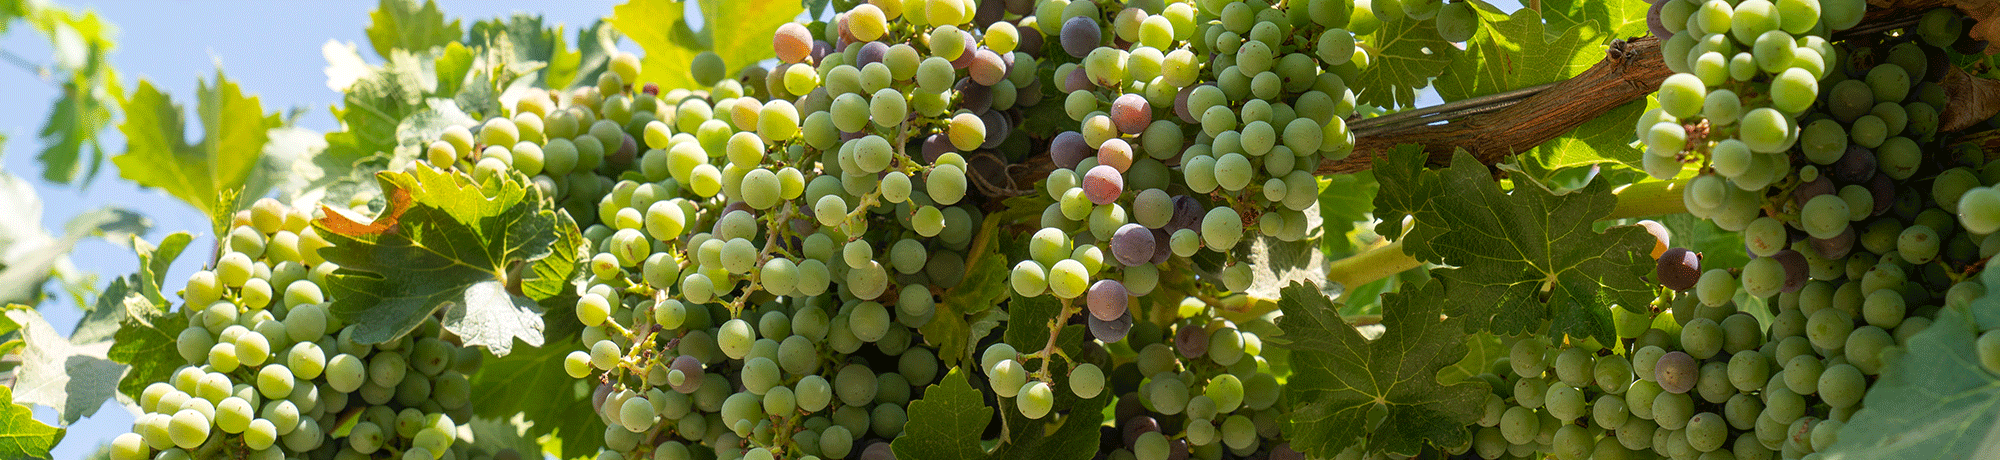 Green grapes growing on a trellised vine.